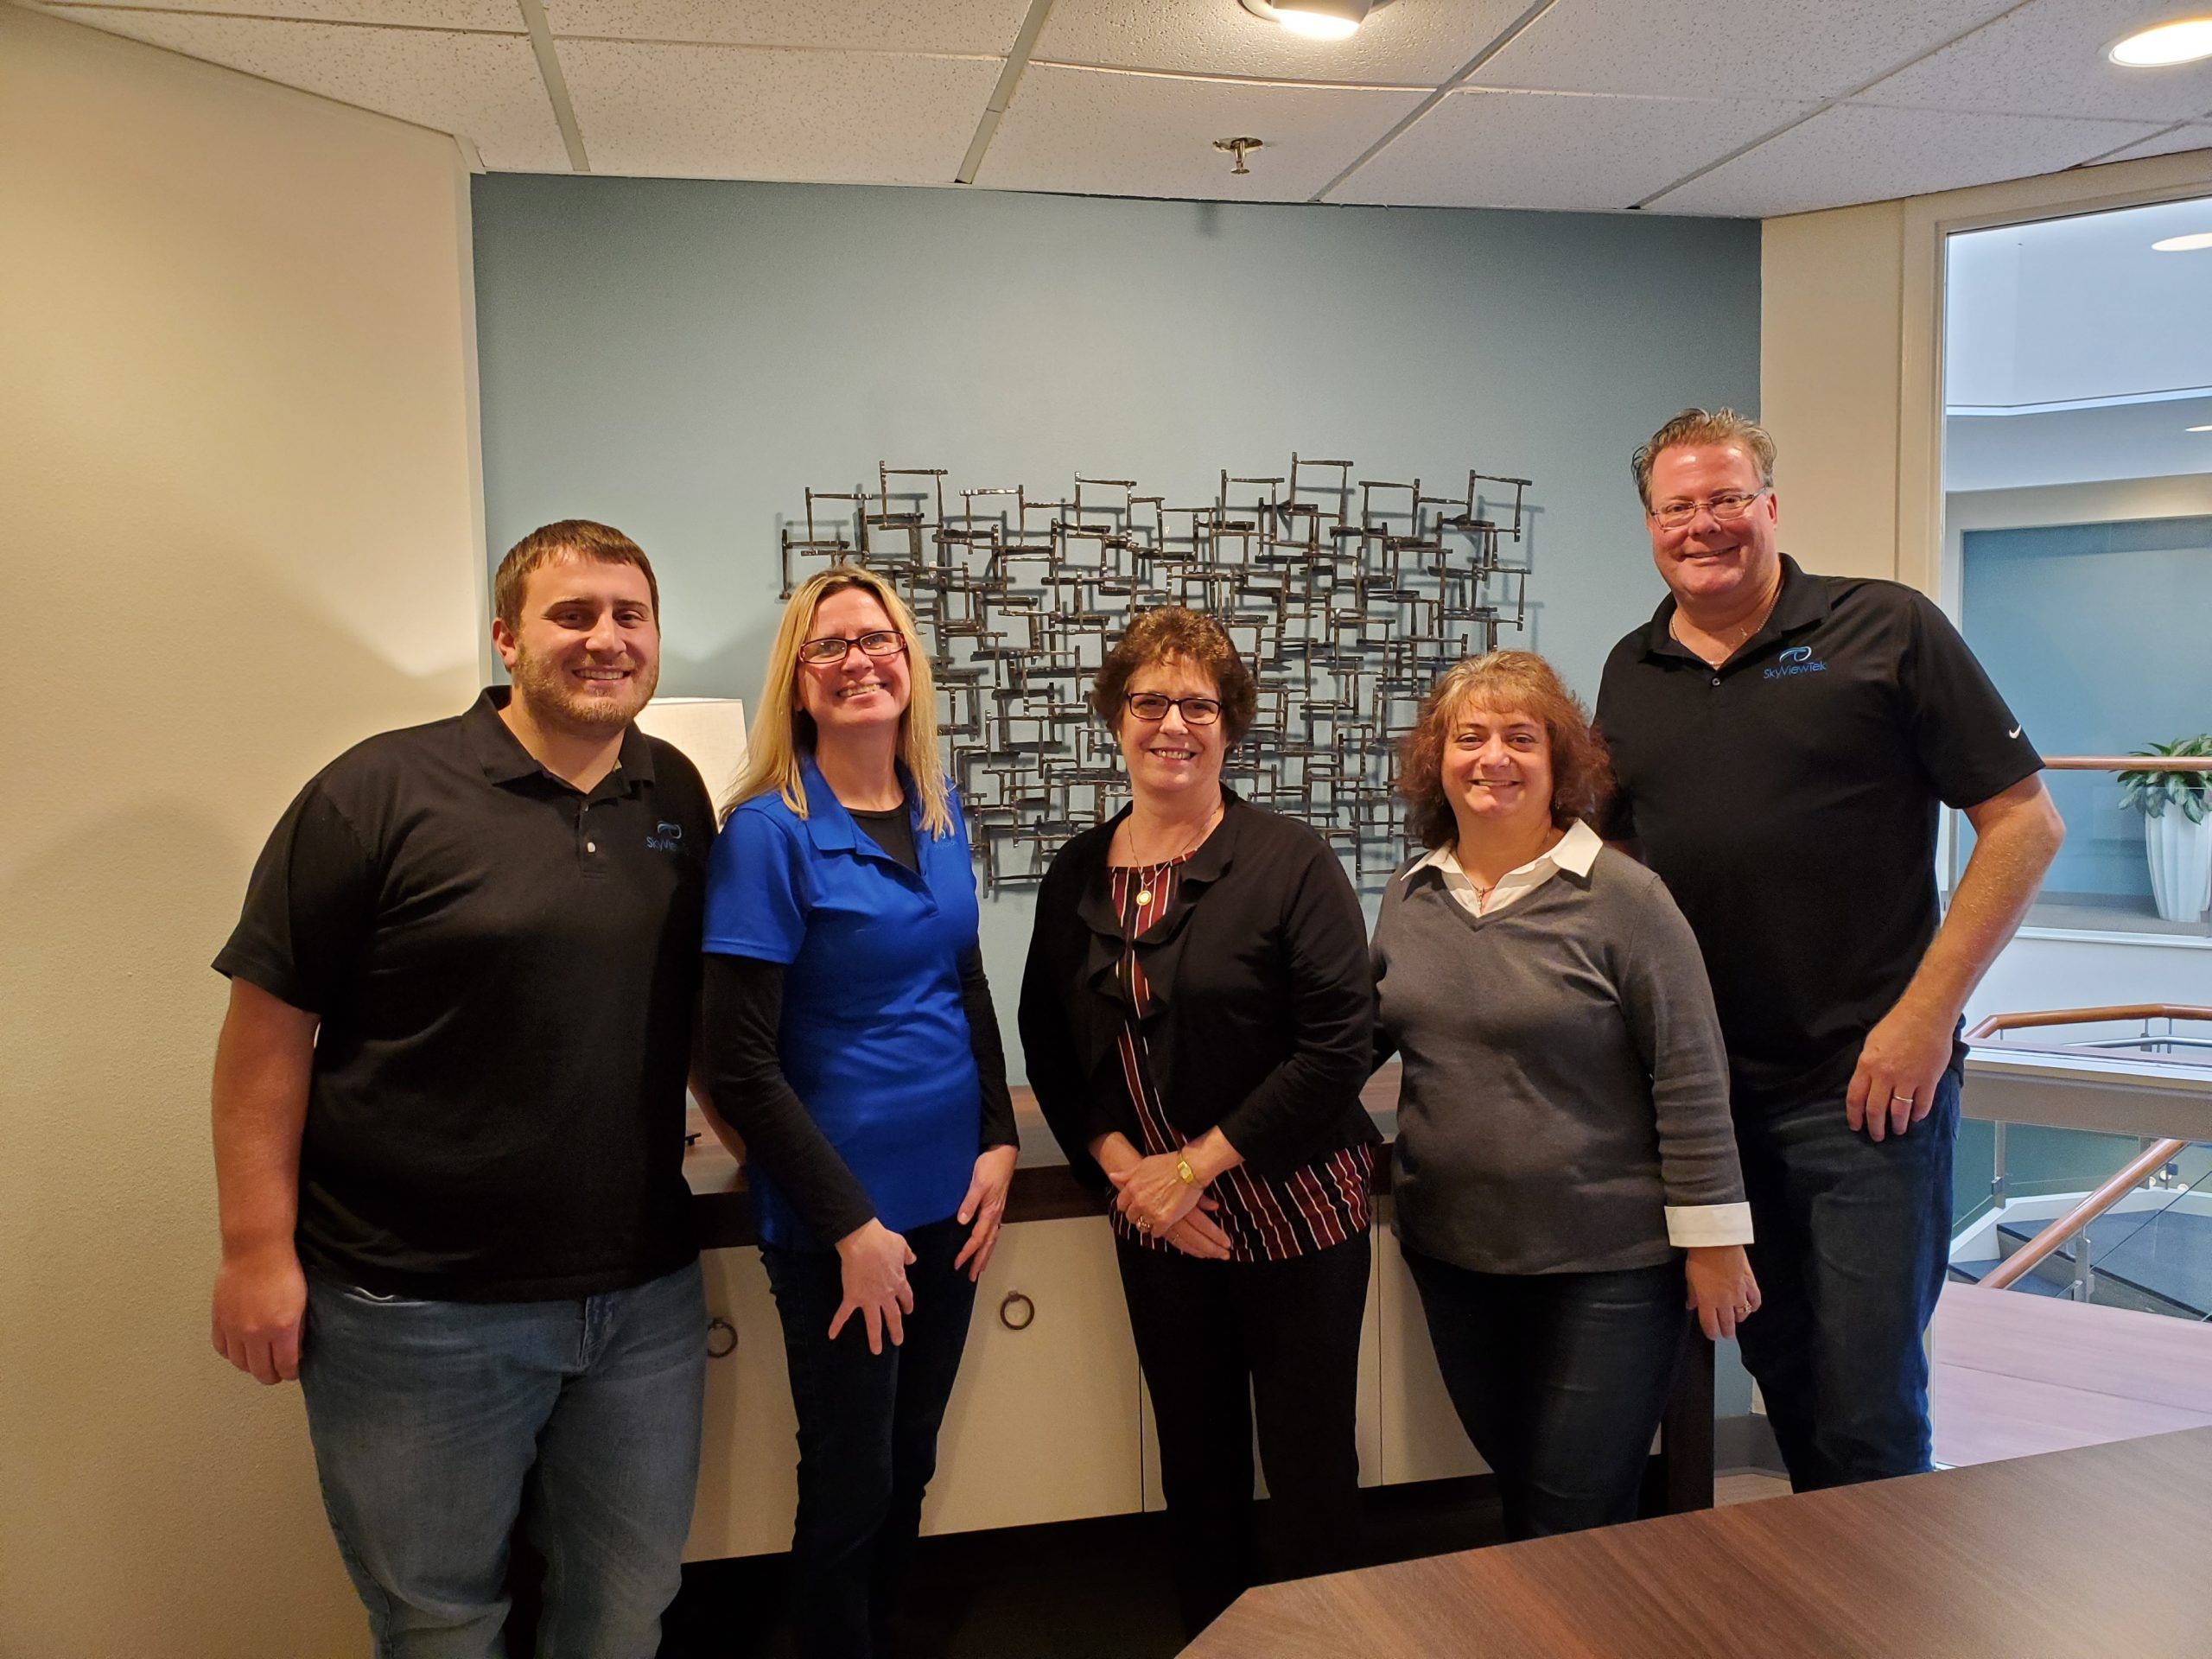 SkyViewTek Team - Pictured from left to right: Eric Gibbs, Susan Dykas, Kitsi Cox, Andrea Blenk, and Bernie Orglmeister SkyViewTek Team - Pictured from left to right: Eric Gibbs, Susan Dykas, Kitsi Cox, Andrea Blenk, and Bernie Orglmeister